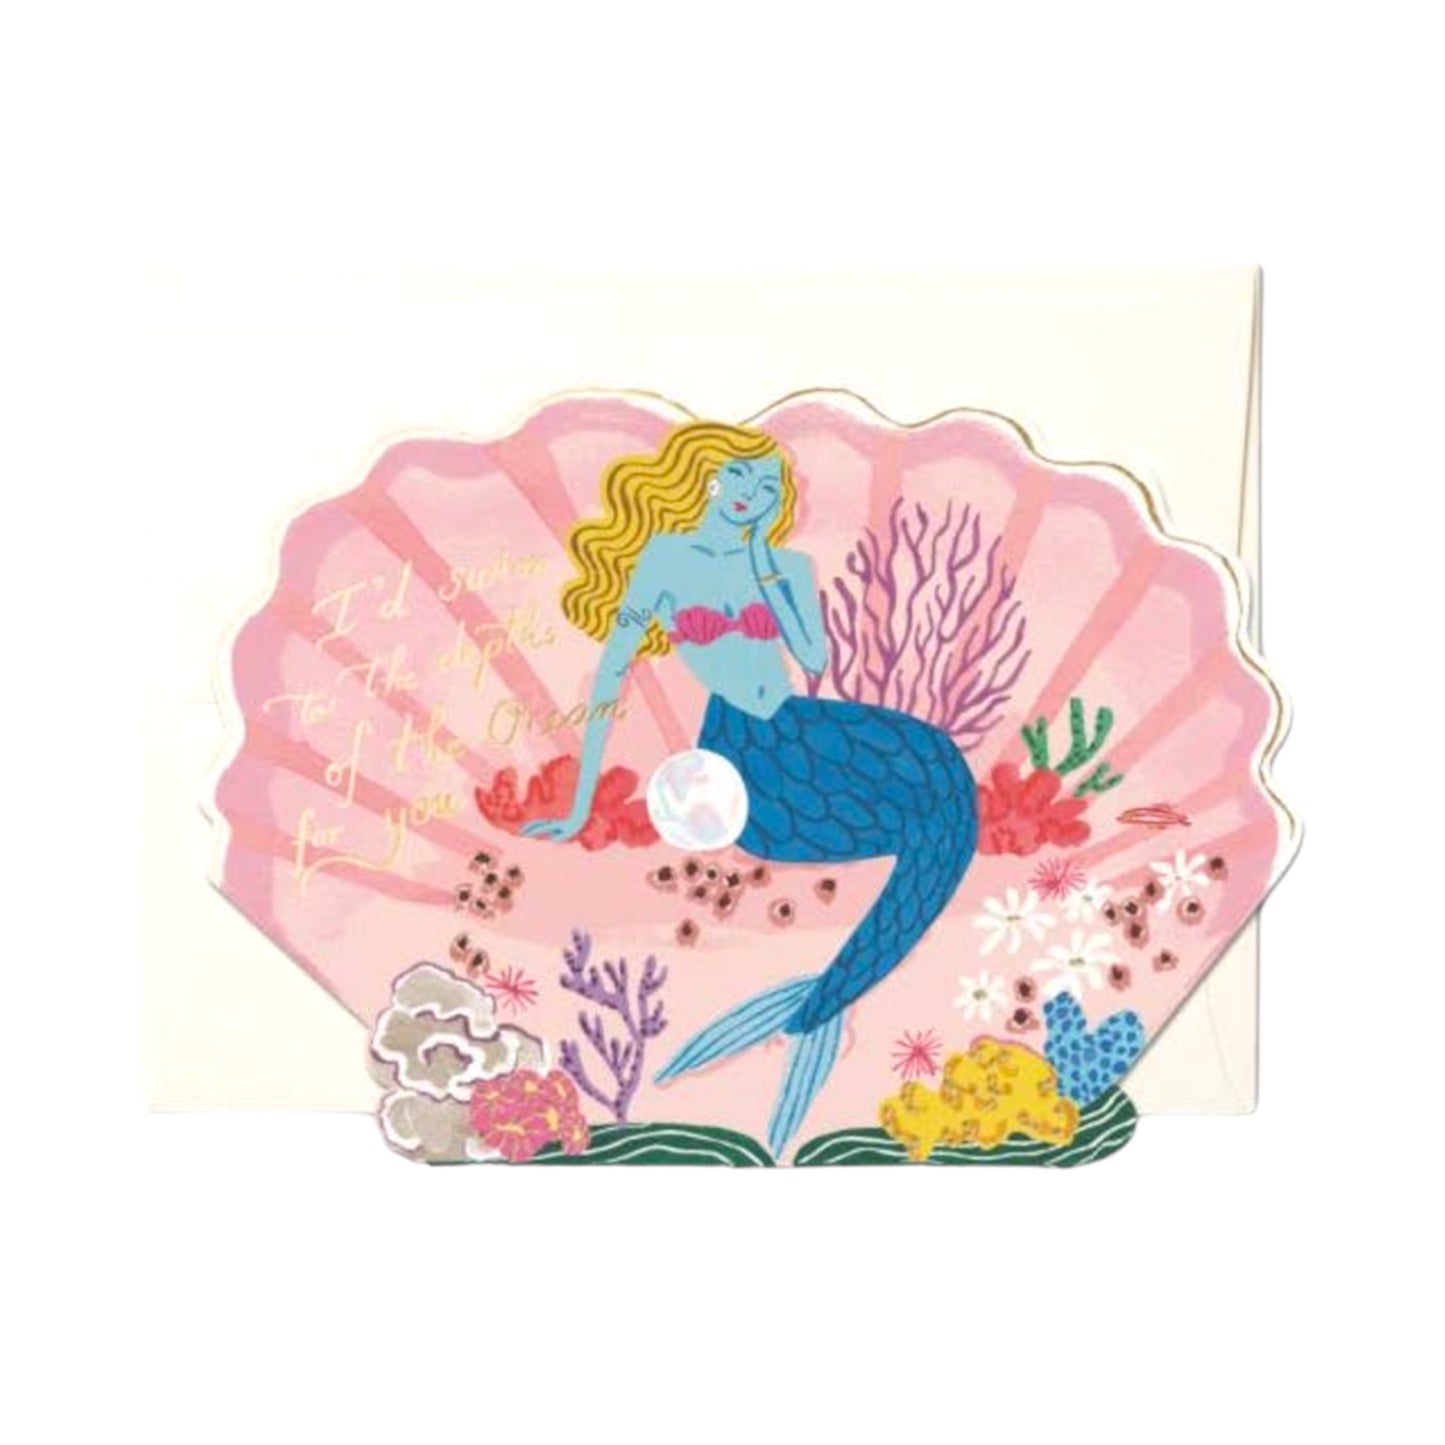 Other Fish in the Sea - Greeting Card